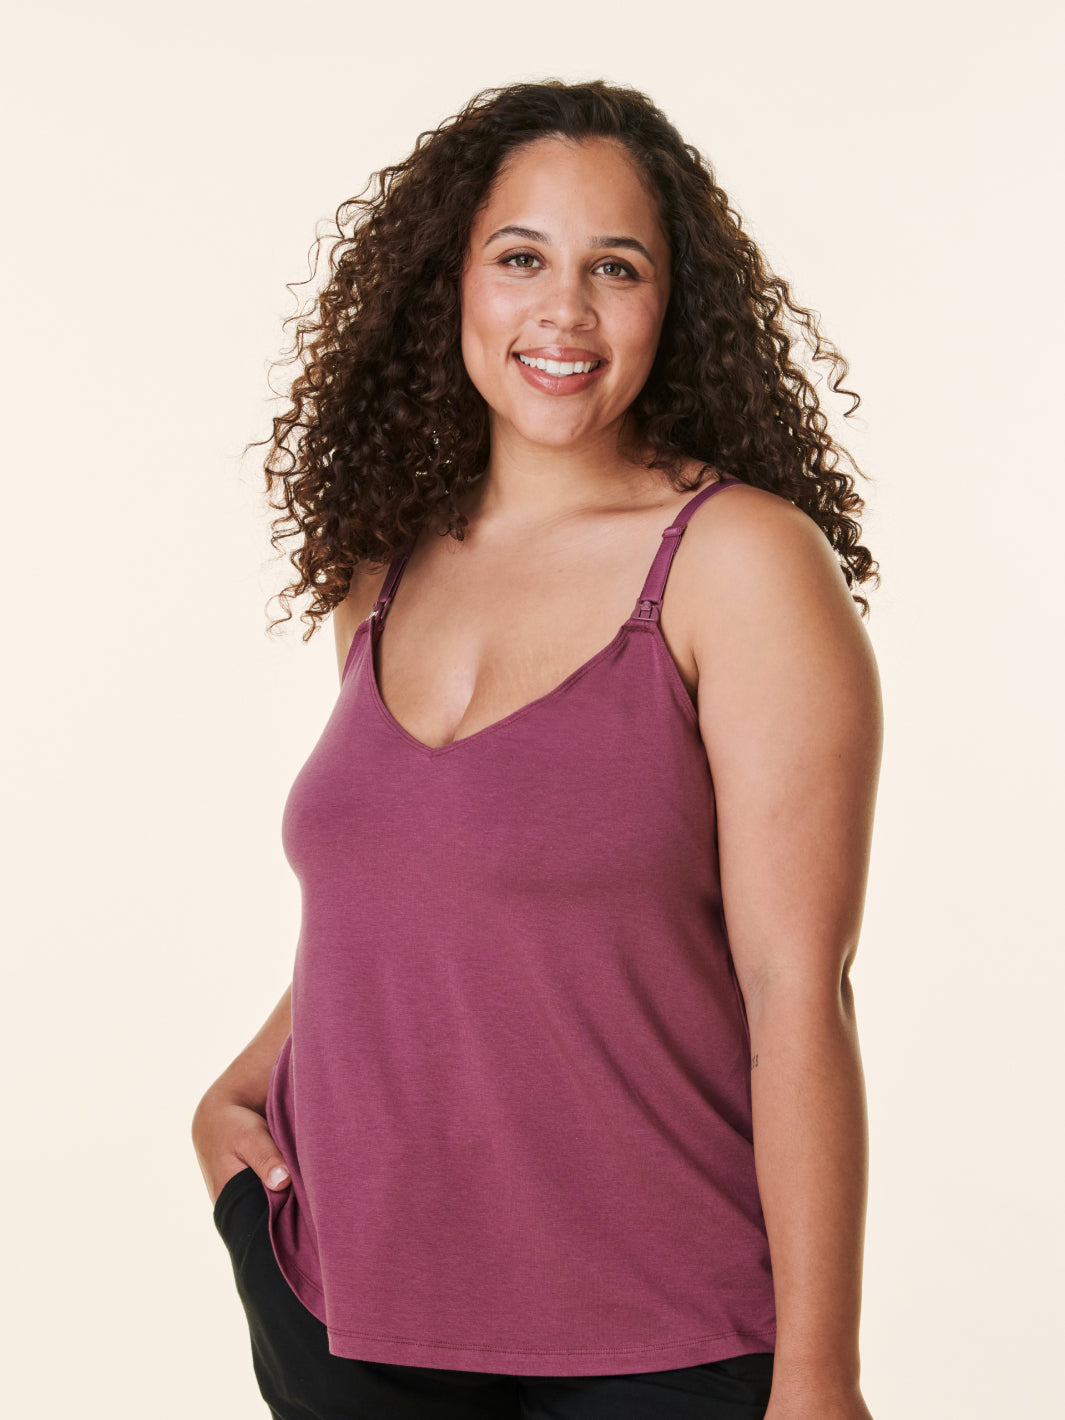 Lactation Connection - Treat yourself or a friend to a Dream Nursing Tank  by Bravado or quality made in the USA sleepwear buy Amamante and your  entire order ships FREE! #pajamalove #nursingwear #